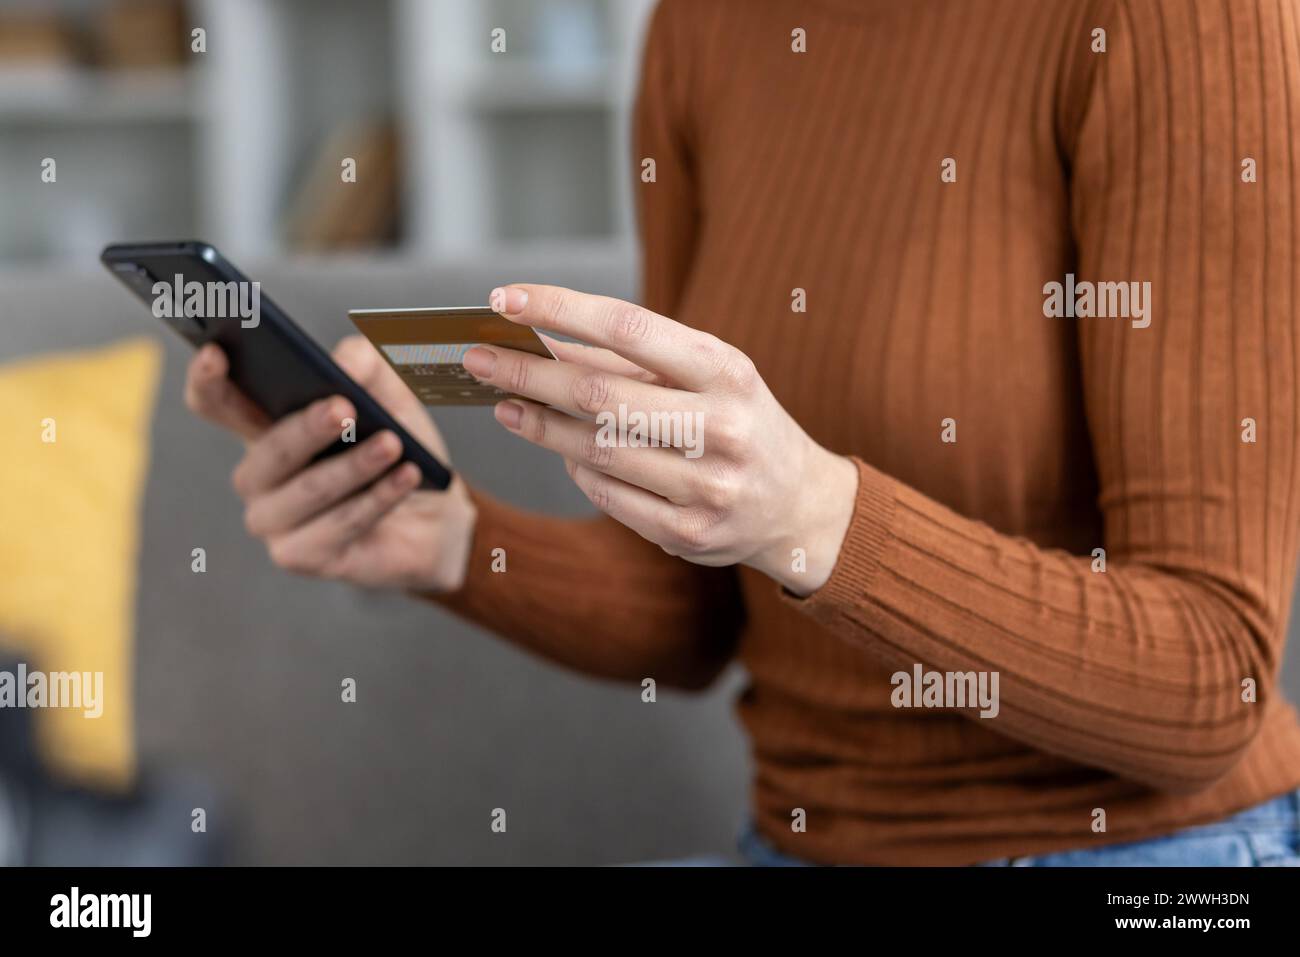 Cropped view of a person's hands holding a credit card and a smartphone, indicative of a secure online payment or mobile banking transaction. Stock Photo